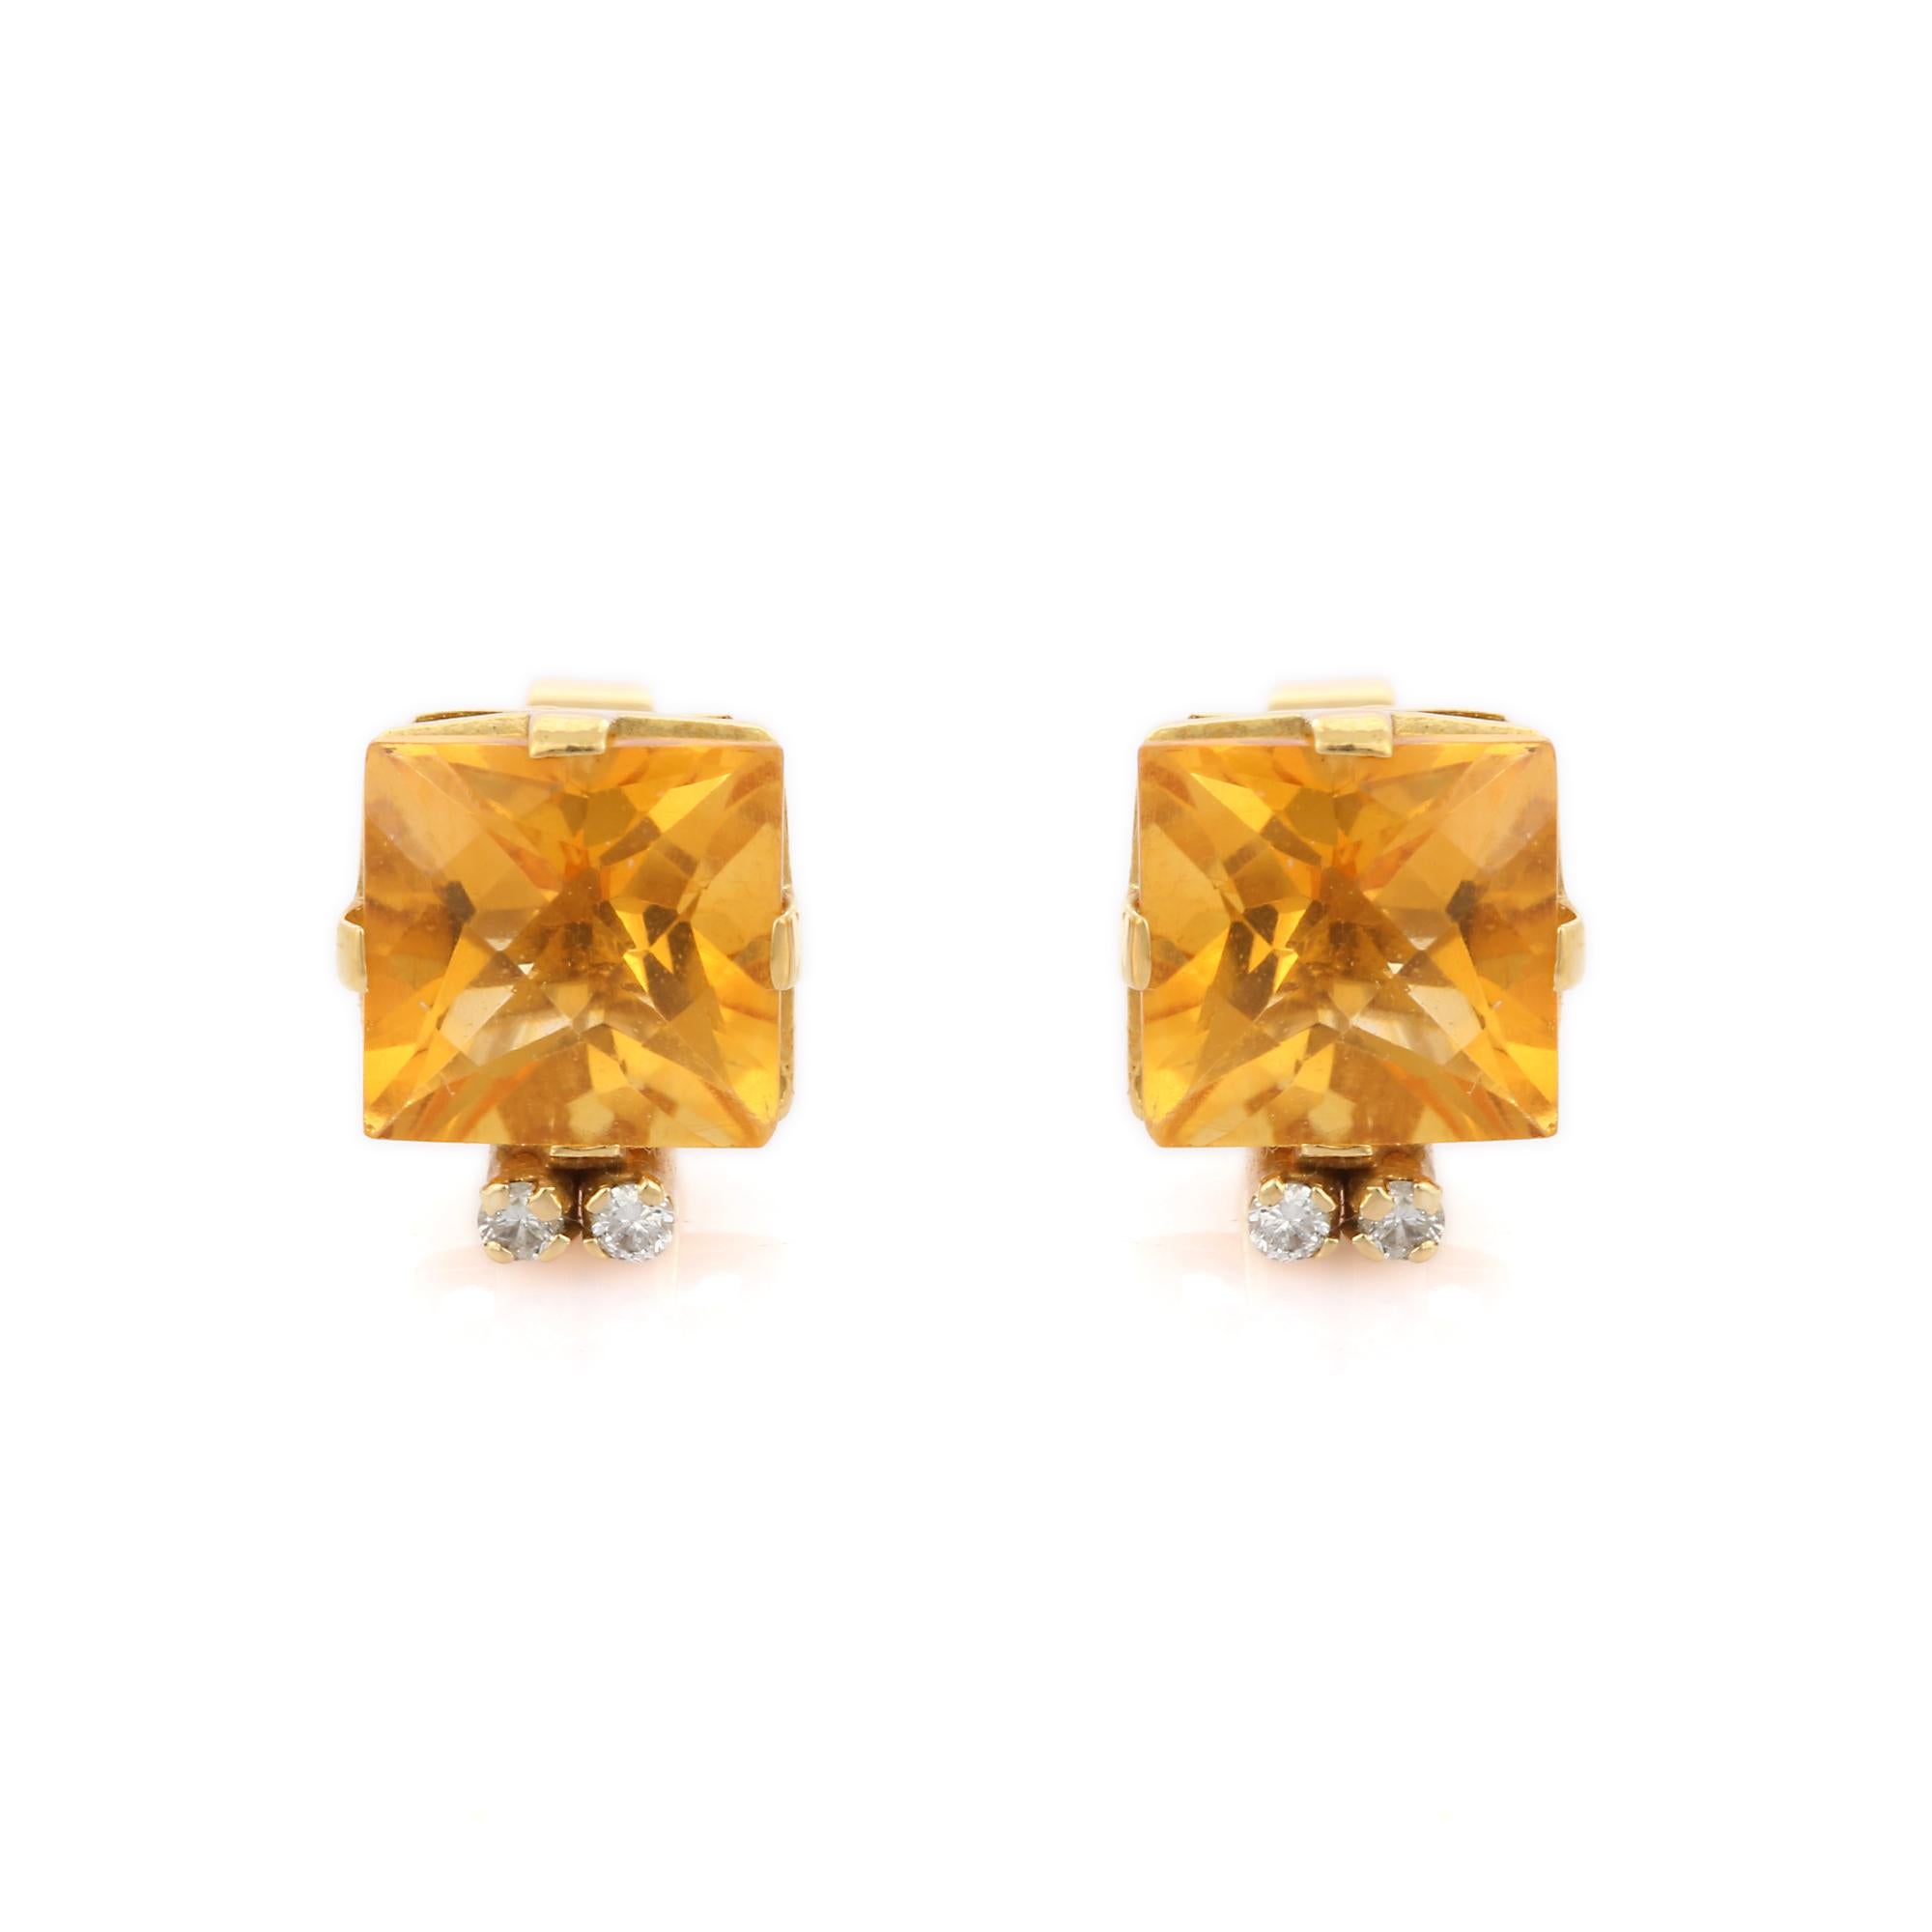 5.31 Ct Citrine Diamond Stud Earrings in 18K Yellow Gold In New Condition For Sale In Houston, TX